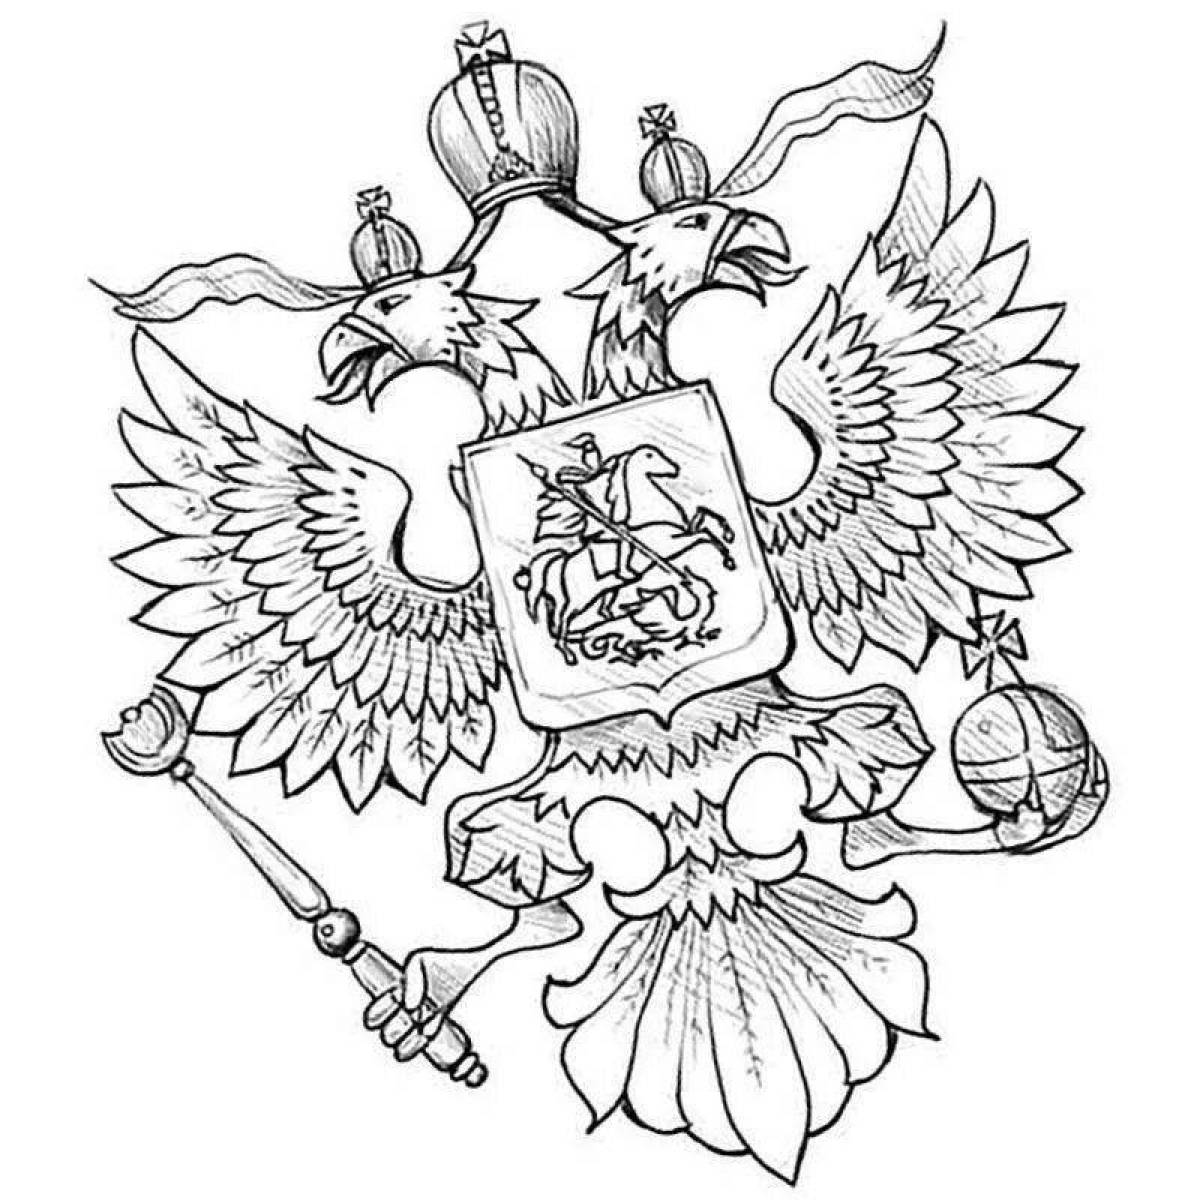 Coat of arms of the Russian Federation #2